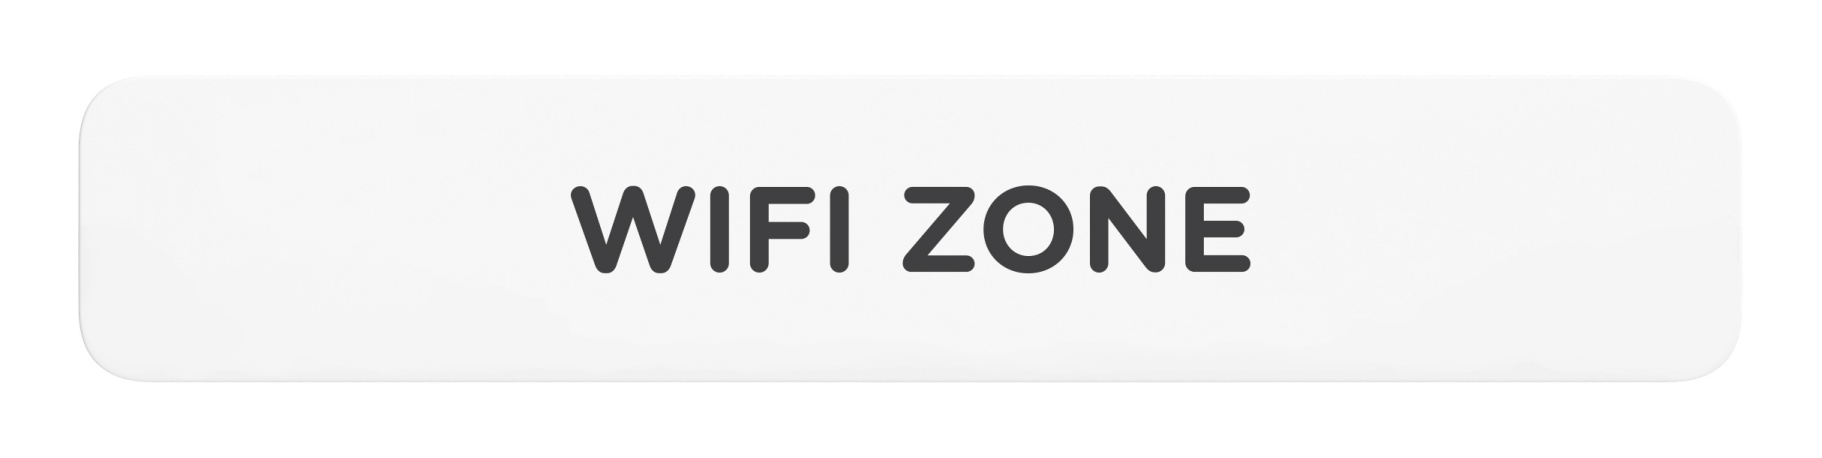 Wifi Zone_Sign_Door_Wall Mount Sign_8x1.5_6mm Thick Solid Surface Sign with Inlay Resins_Self Adhesive